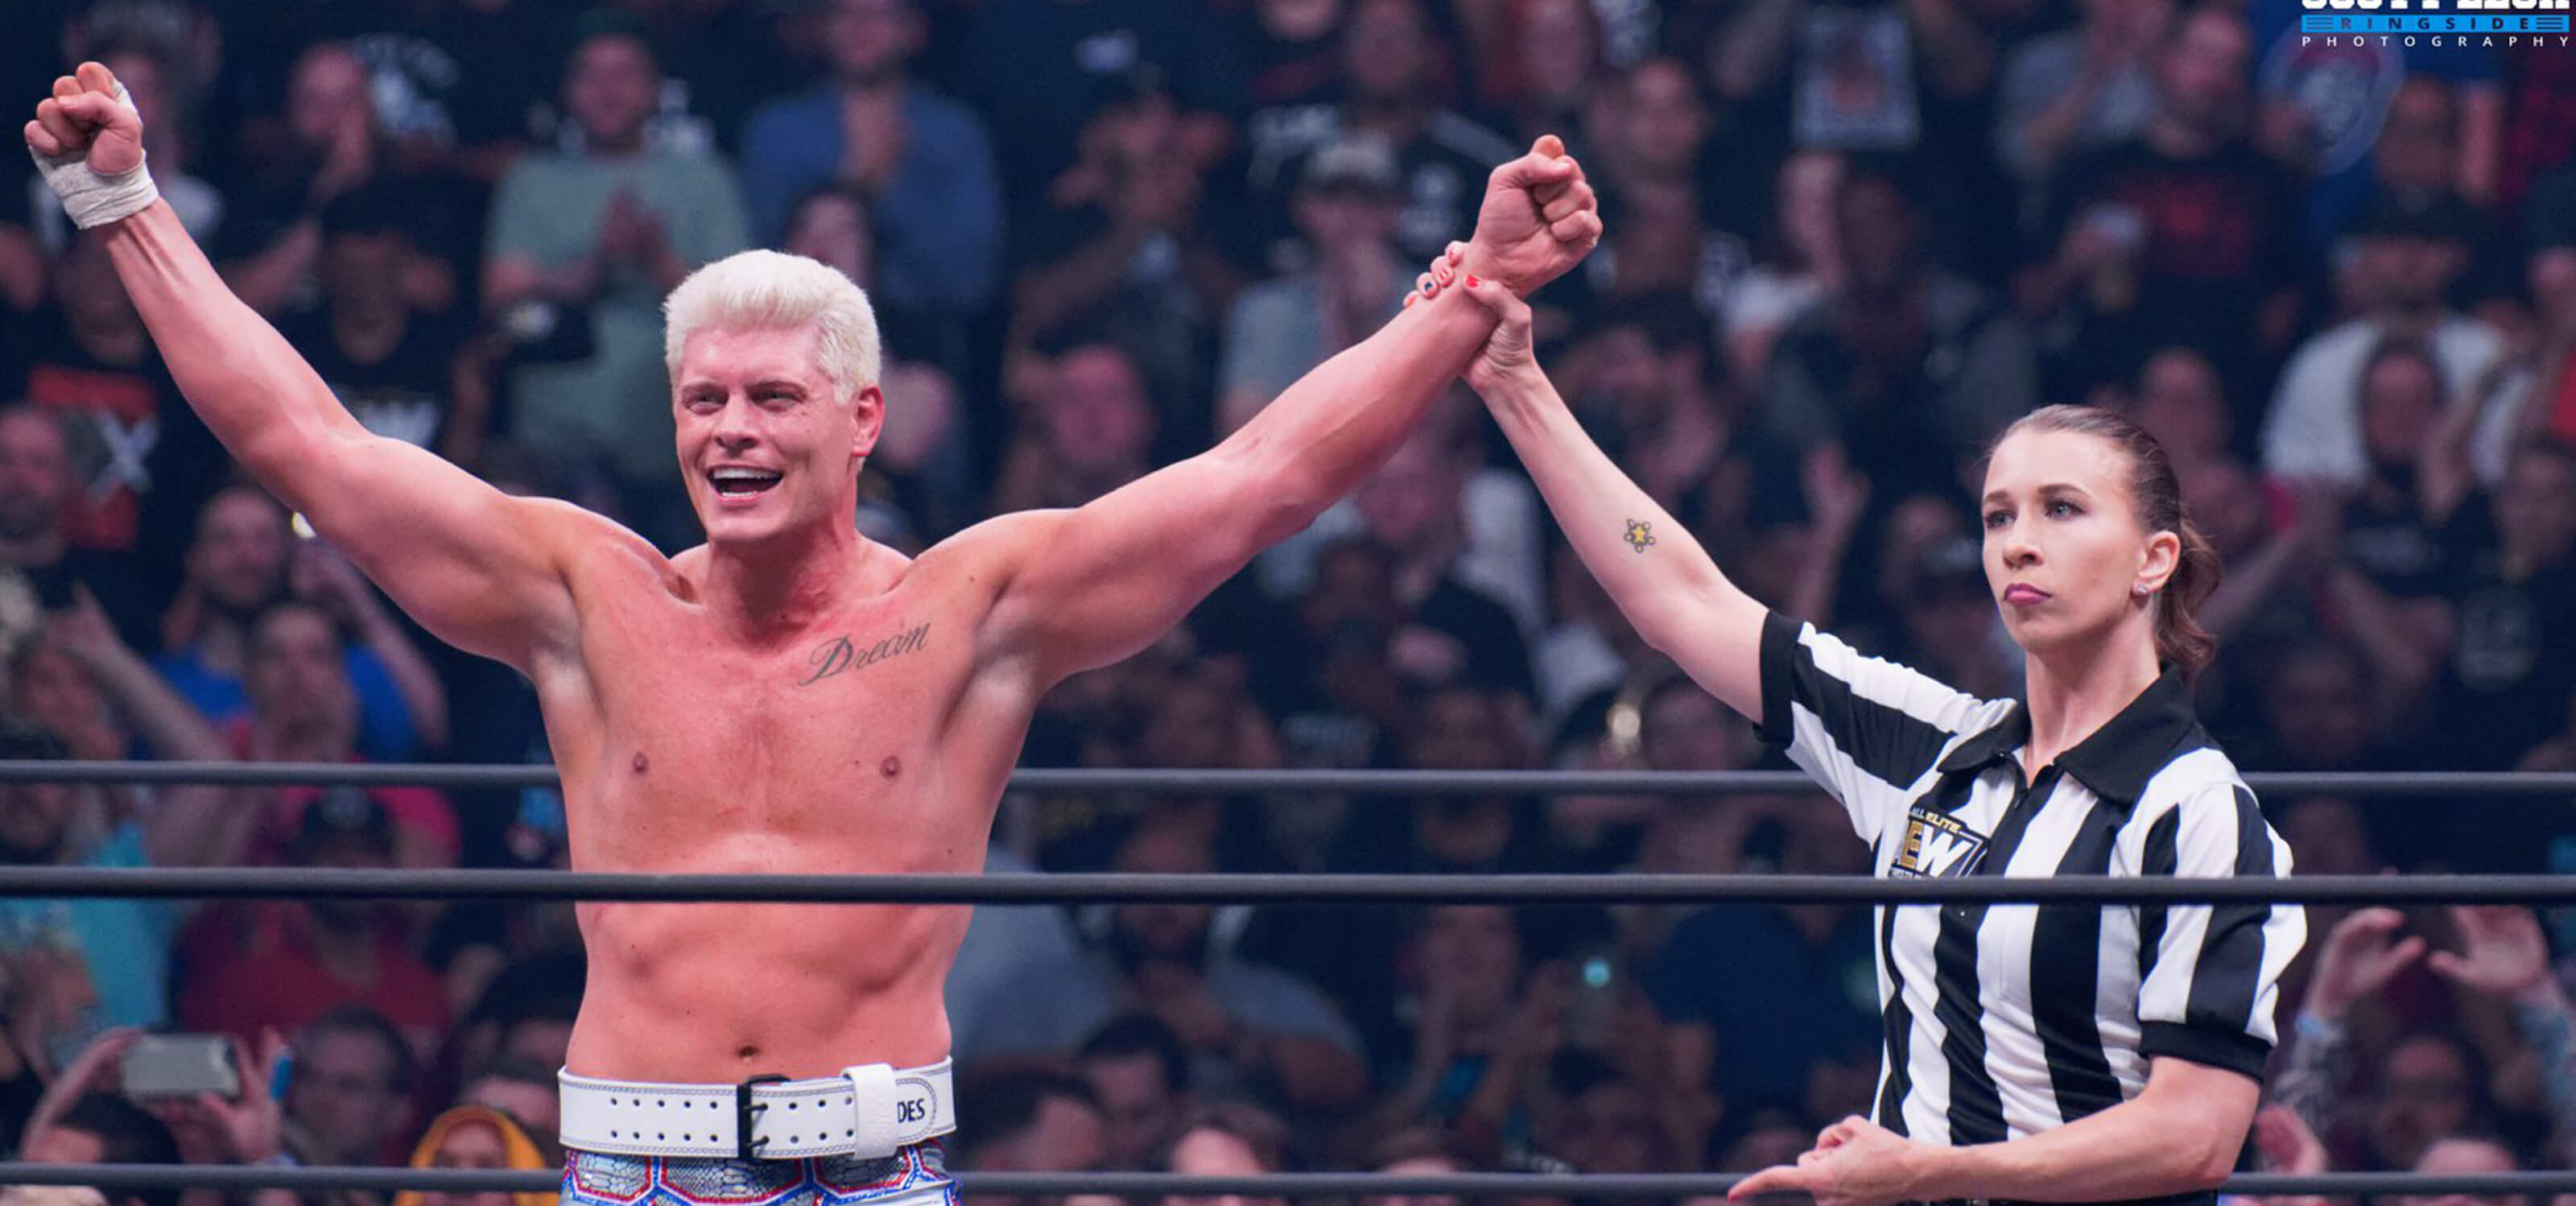 Referee Aubrey Edwards in the ring with AEW wrestler and executive vice president Cody Rhodes.